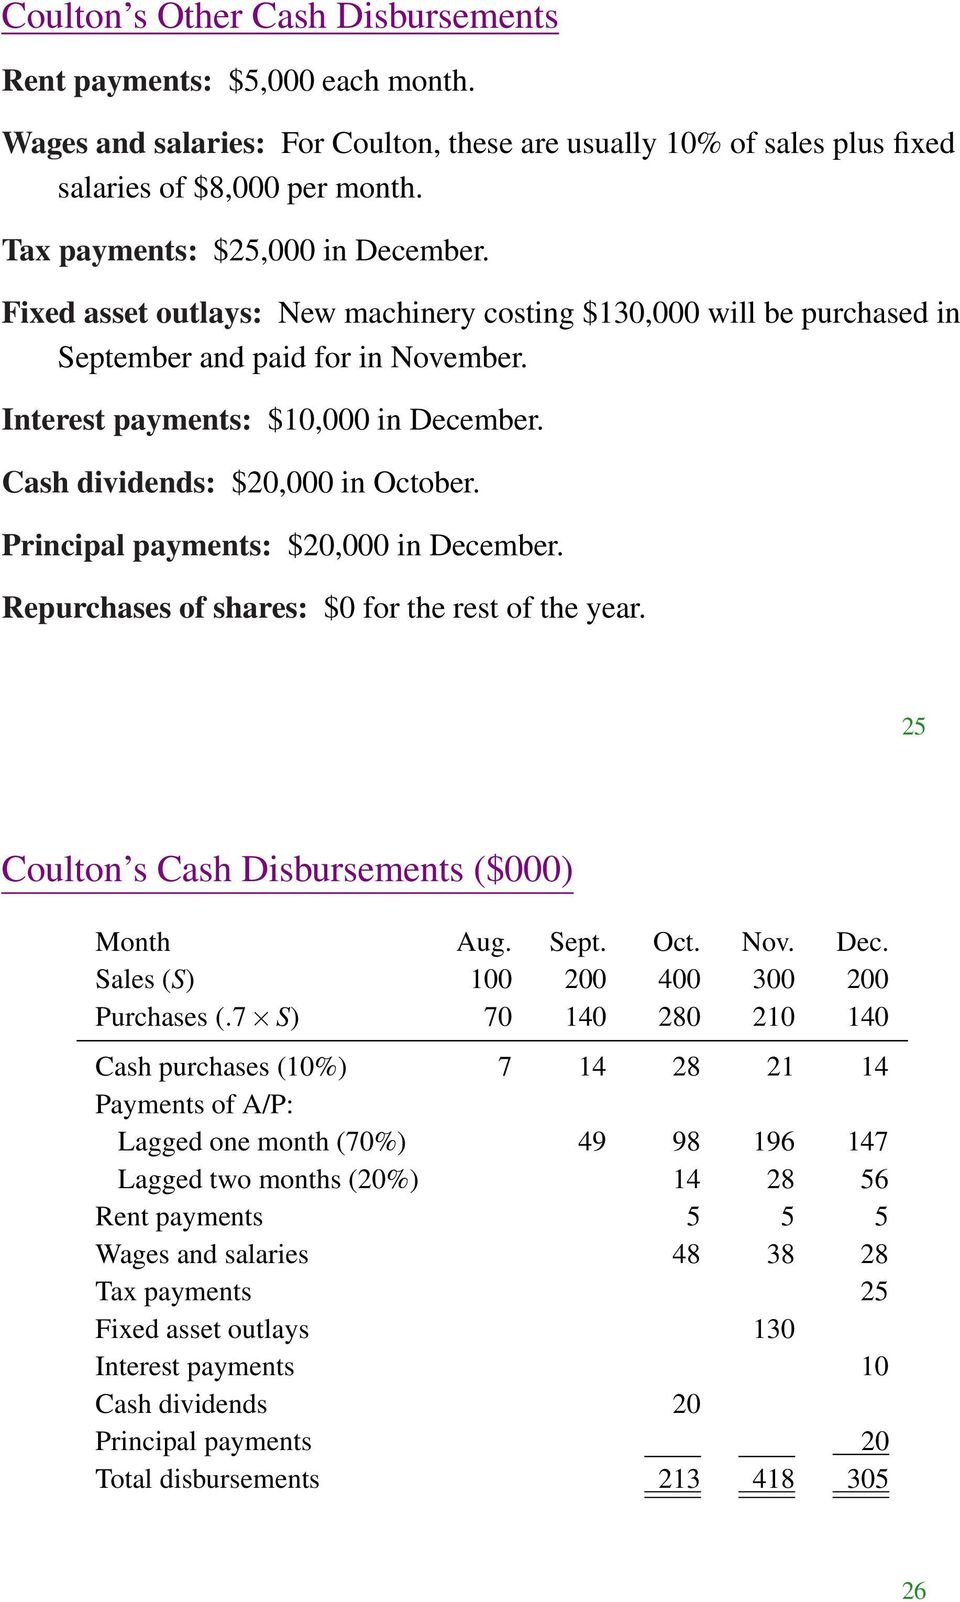 Cash dividends: $20,000 in October. Principal payments: $20,000 in December. Repurchases of shares: $0 for the rest of the year. 25 Coulton s Cash Disbursements ($000) Month Aug. Sept. Oct. Nov. Dec. Sales (S) 100 200 400 300 200 Purchases (.